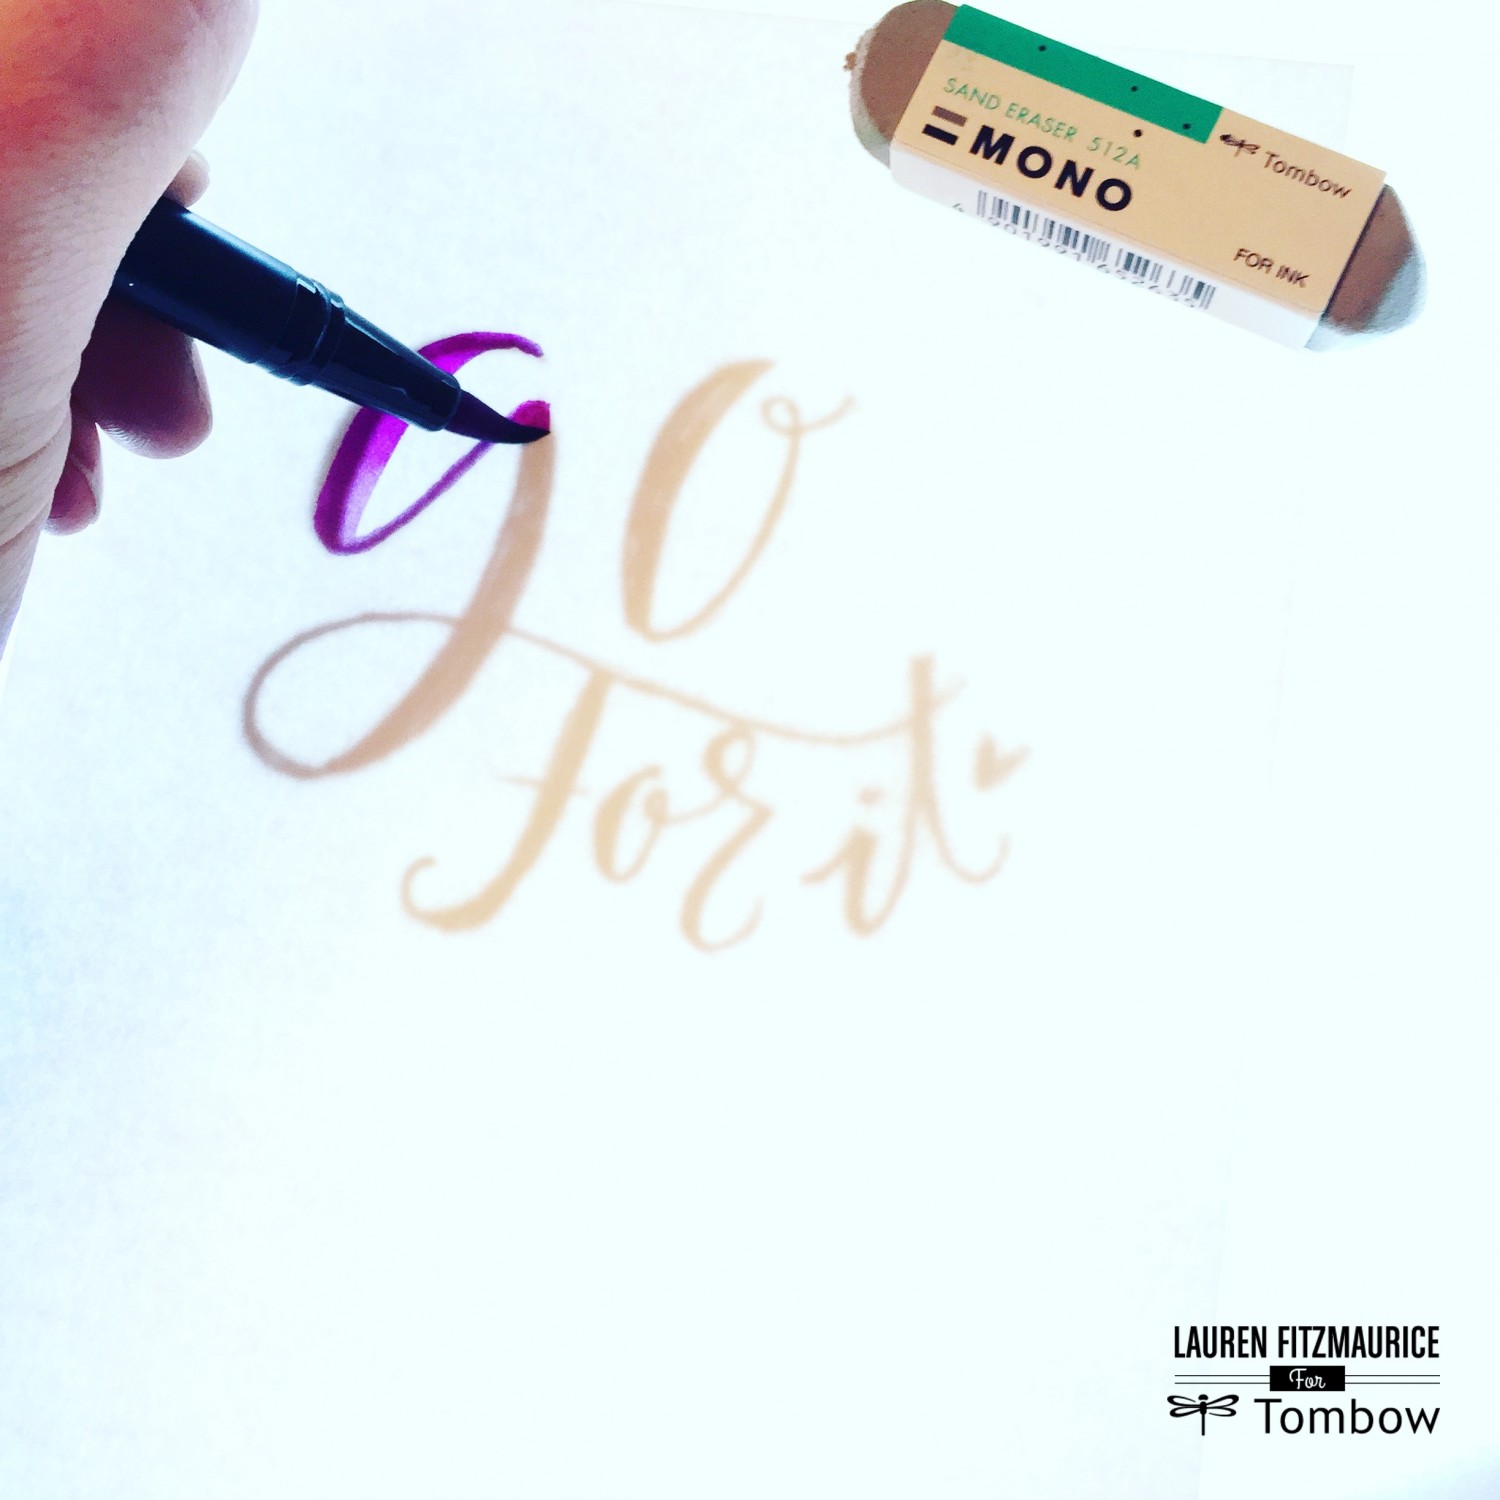 Top 10 tools every letterer needs: Tombow MONO Sand Eraser